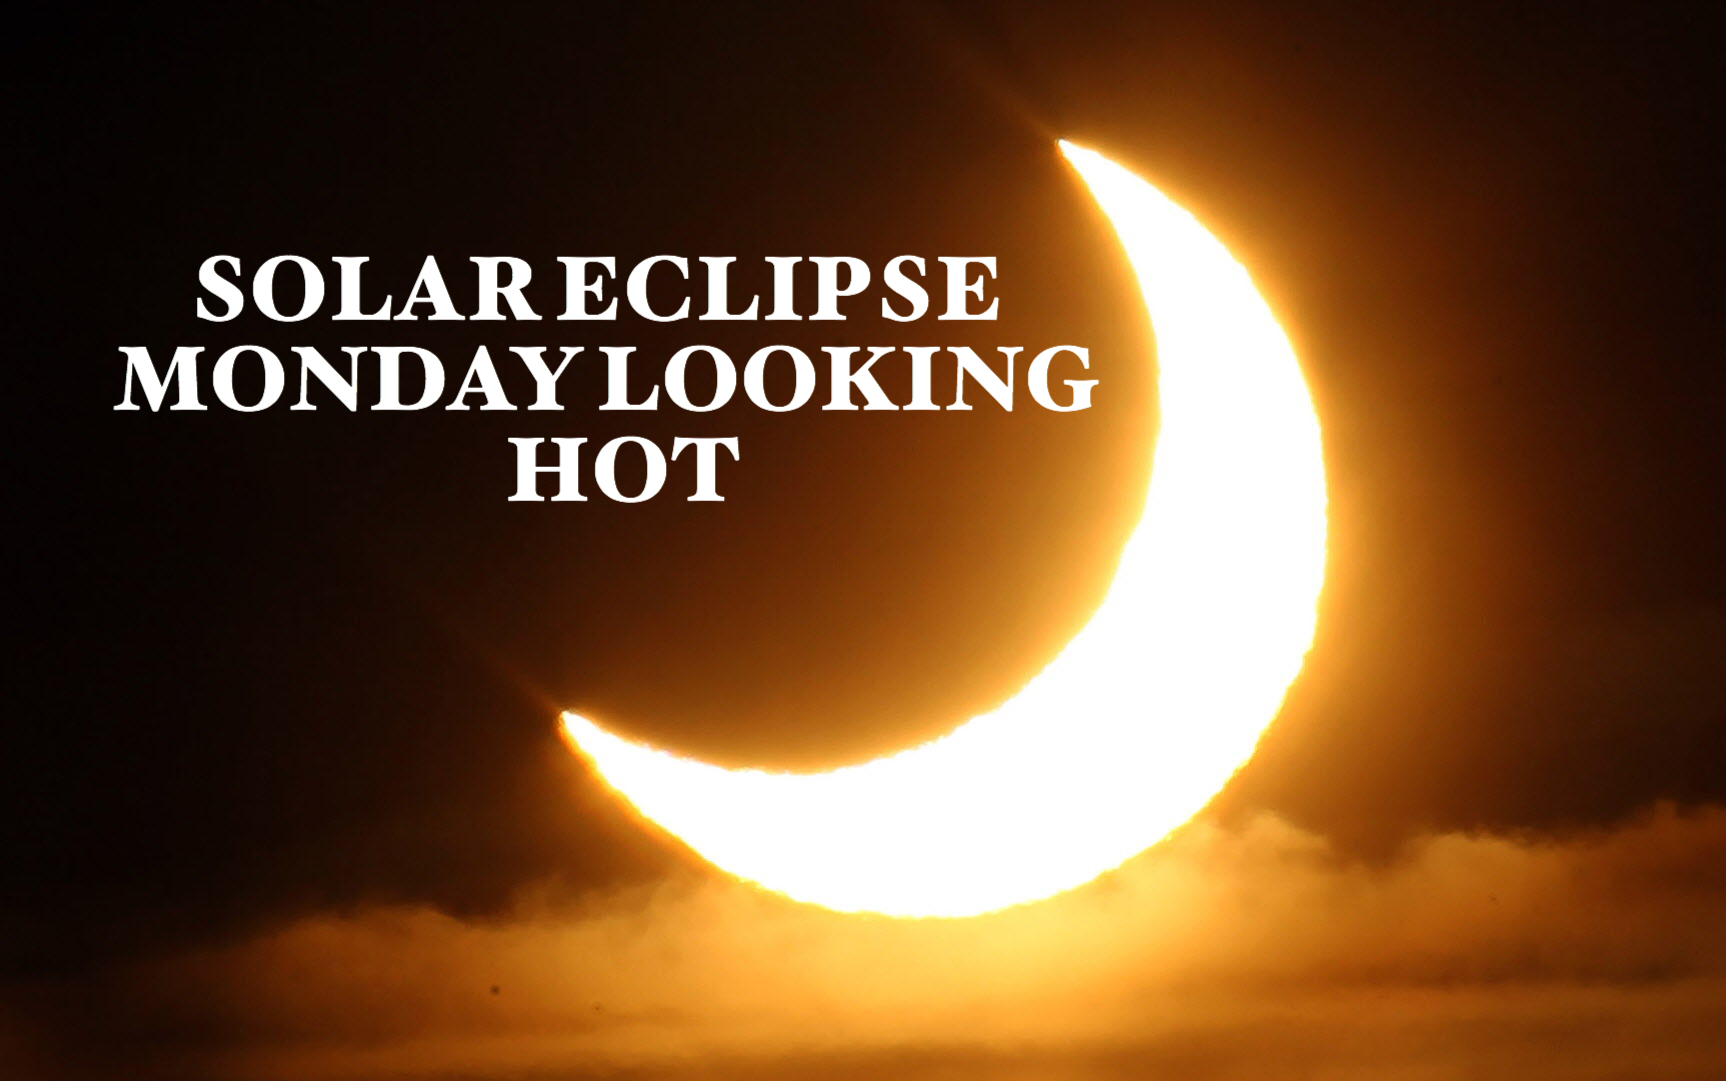 SOLAR ECLIPSE MONDAY LOOKING HOT NYC WEATHER NOW